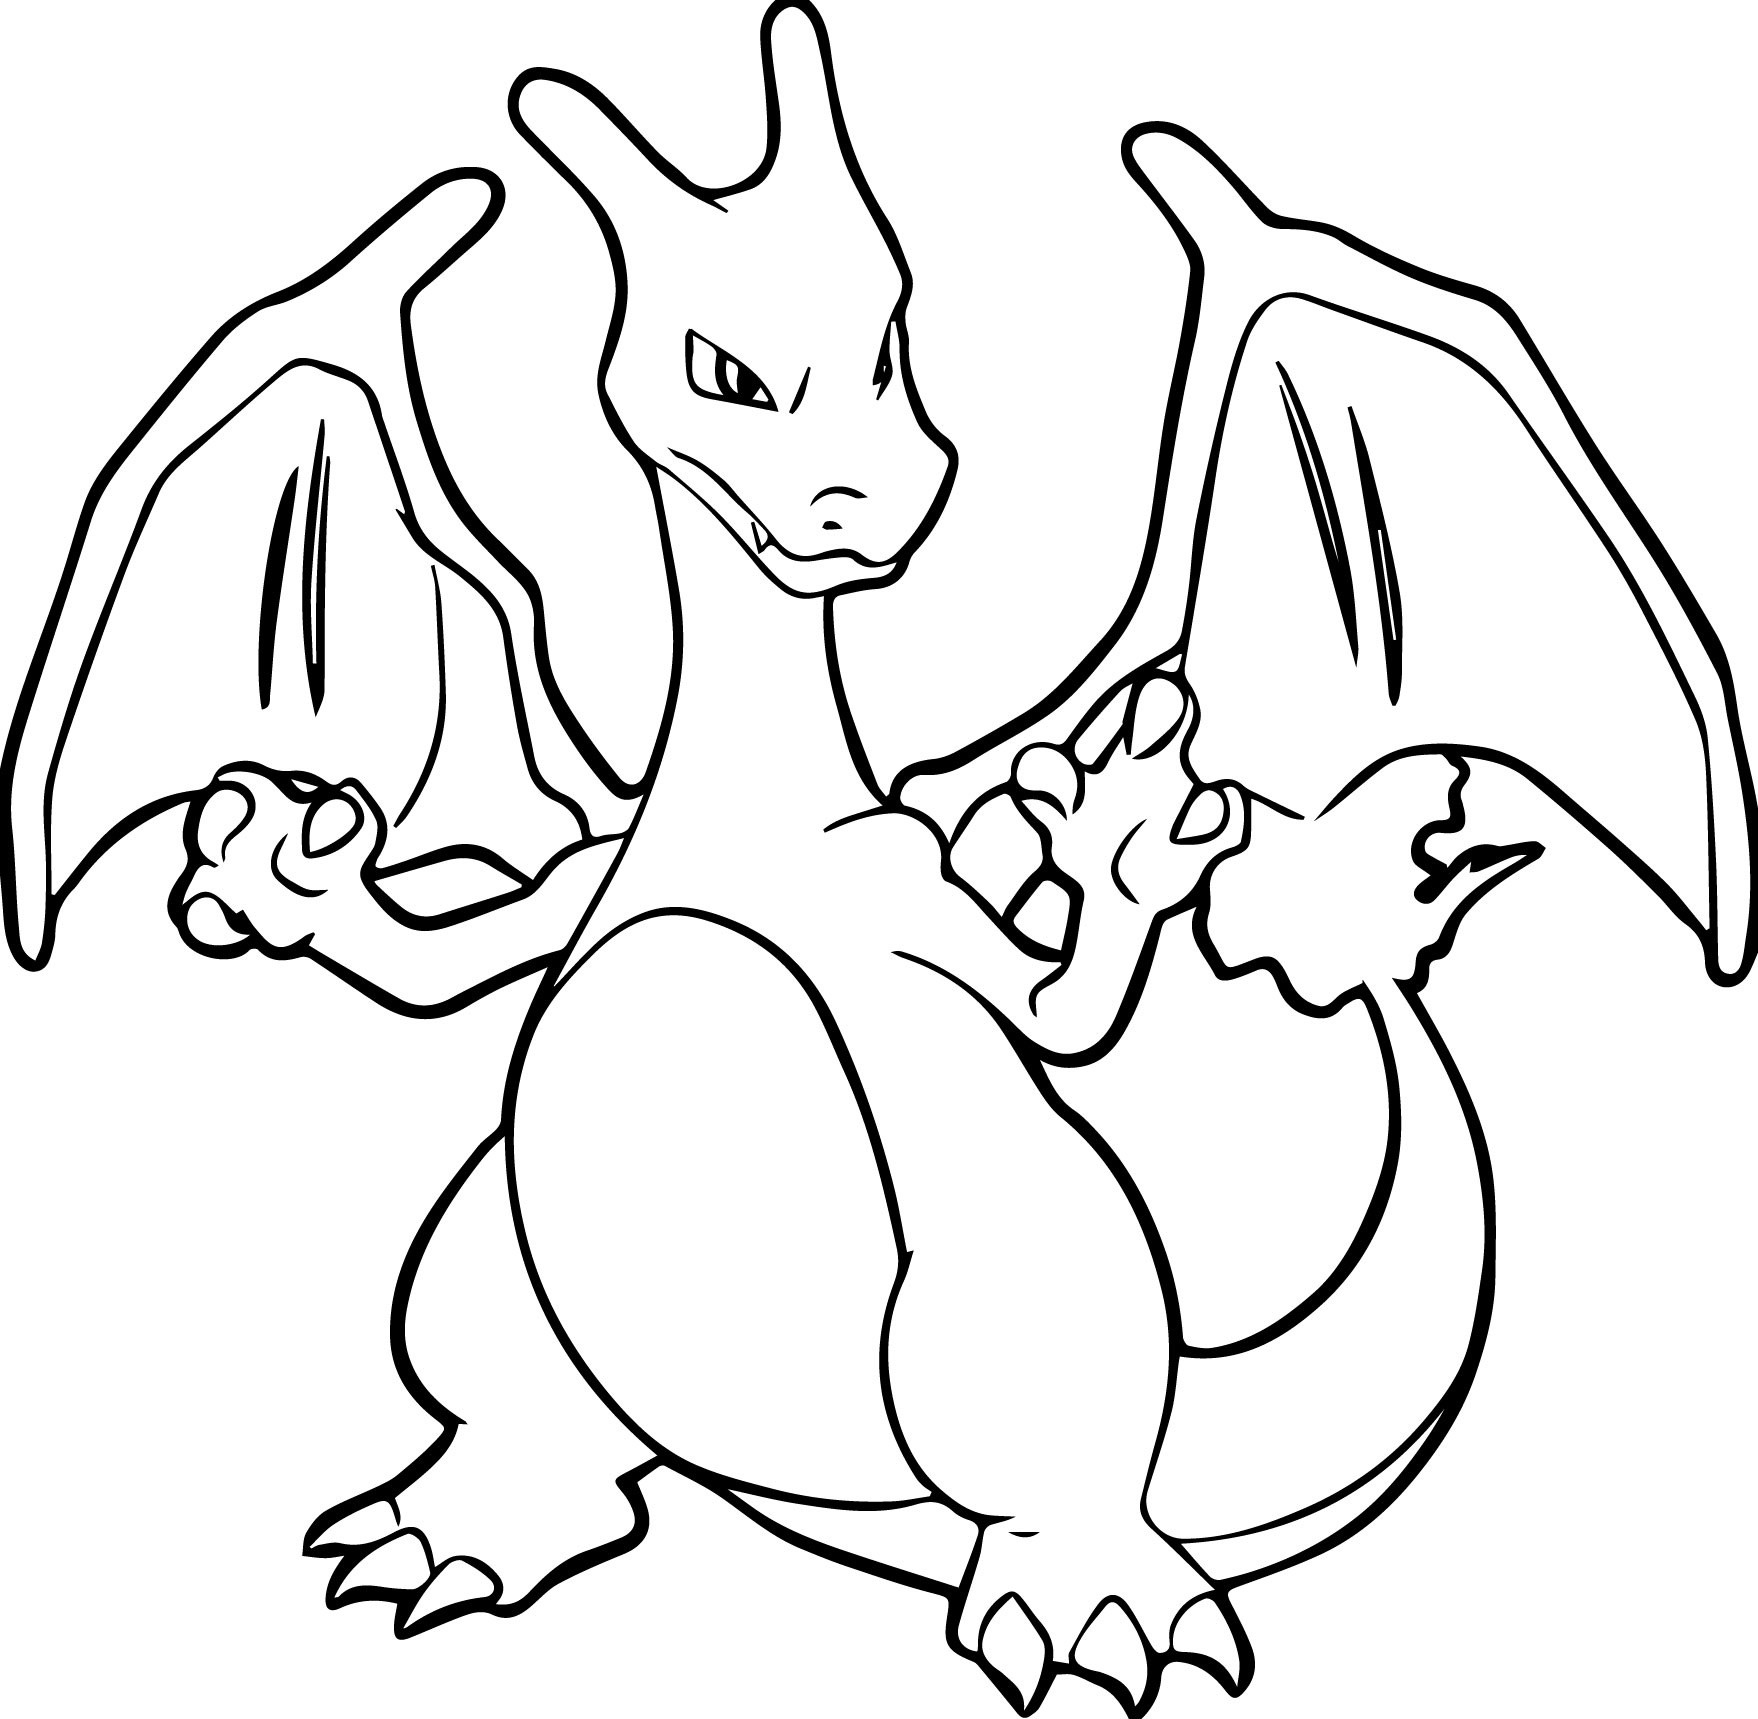 Charizard Coloring Pages Charizard Coloring Pages Jvzooreview